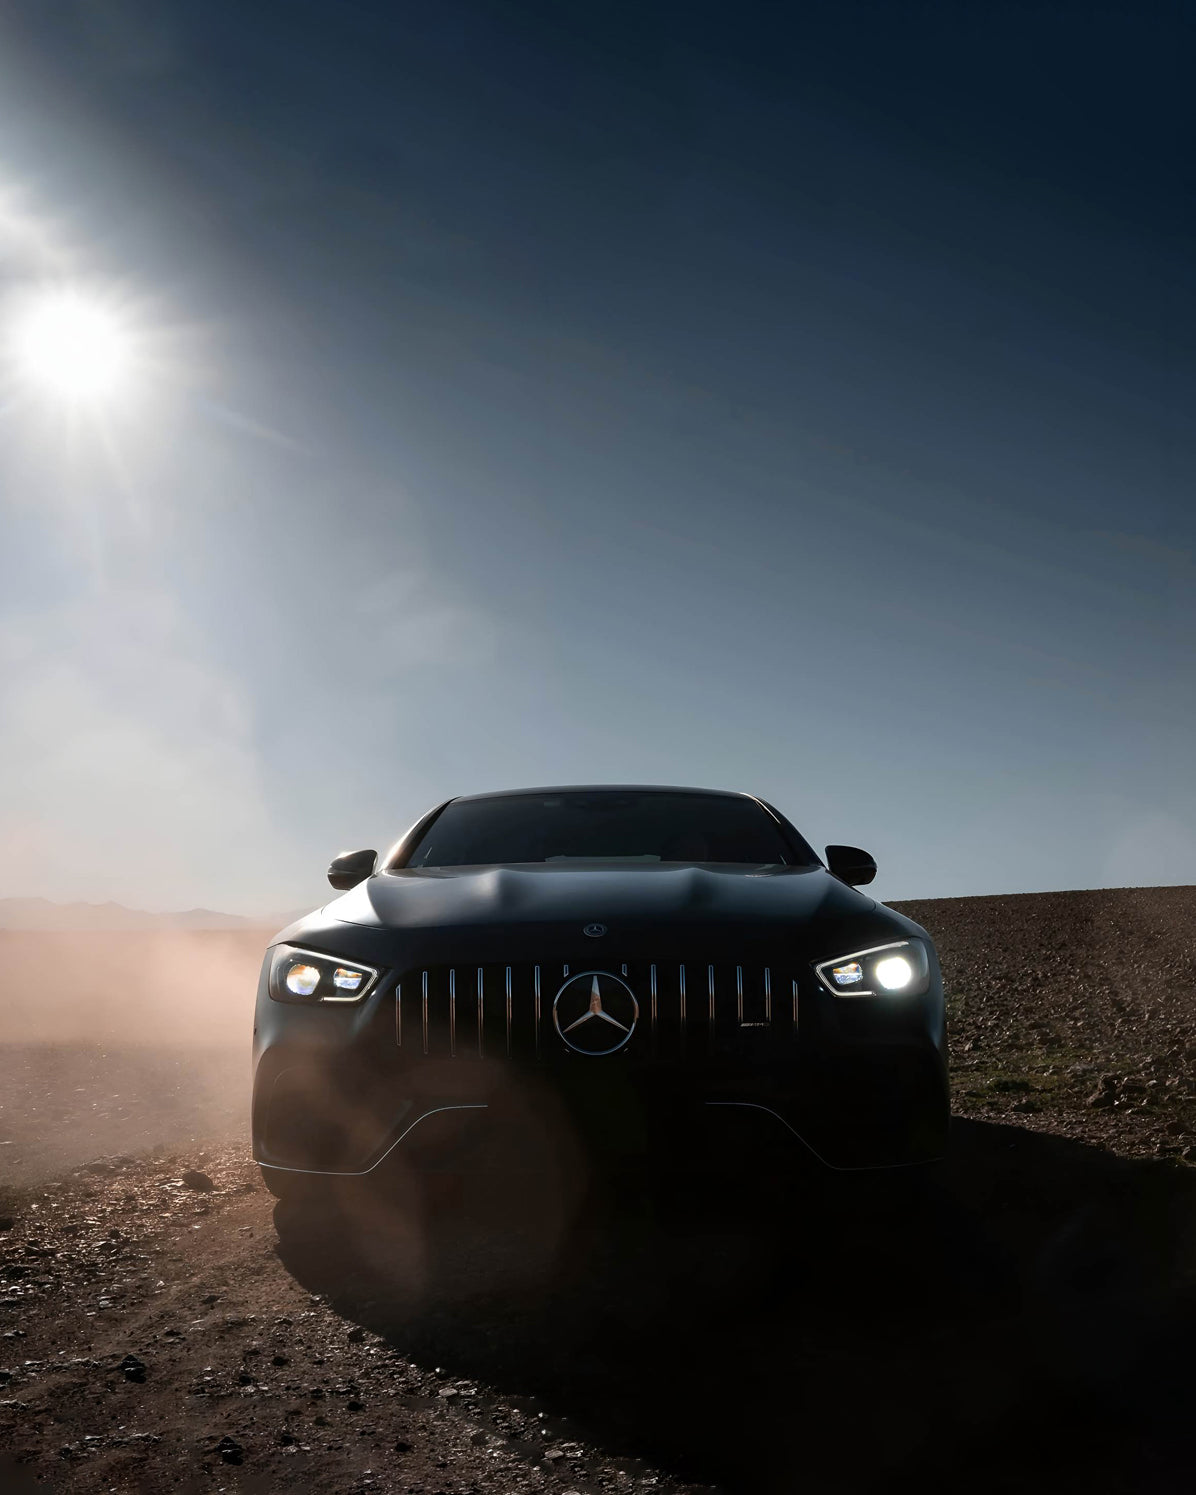 2019 Must-Have Accessories for Your Mercedes-Benz